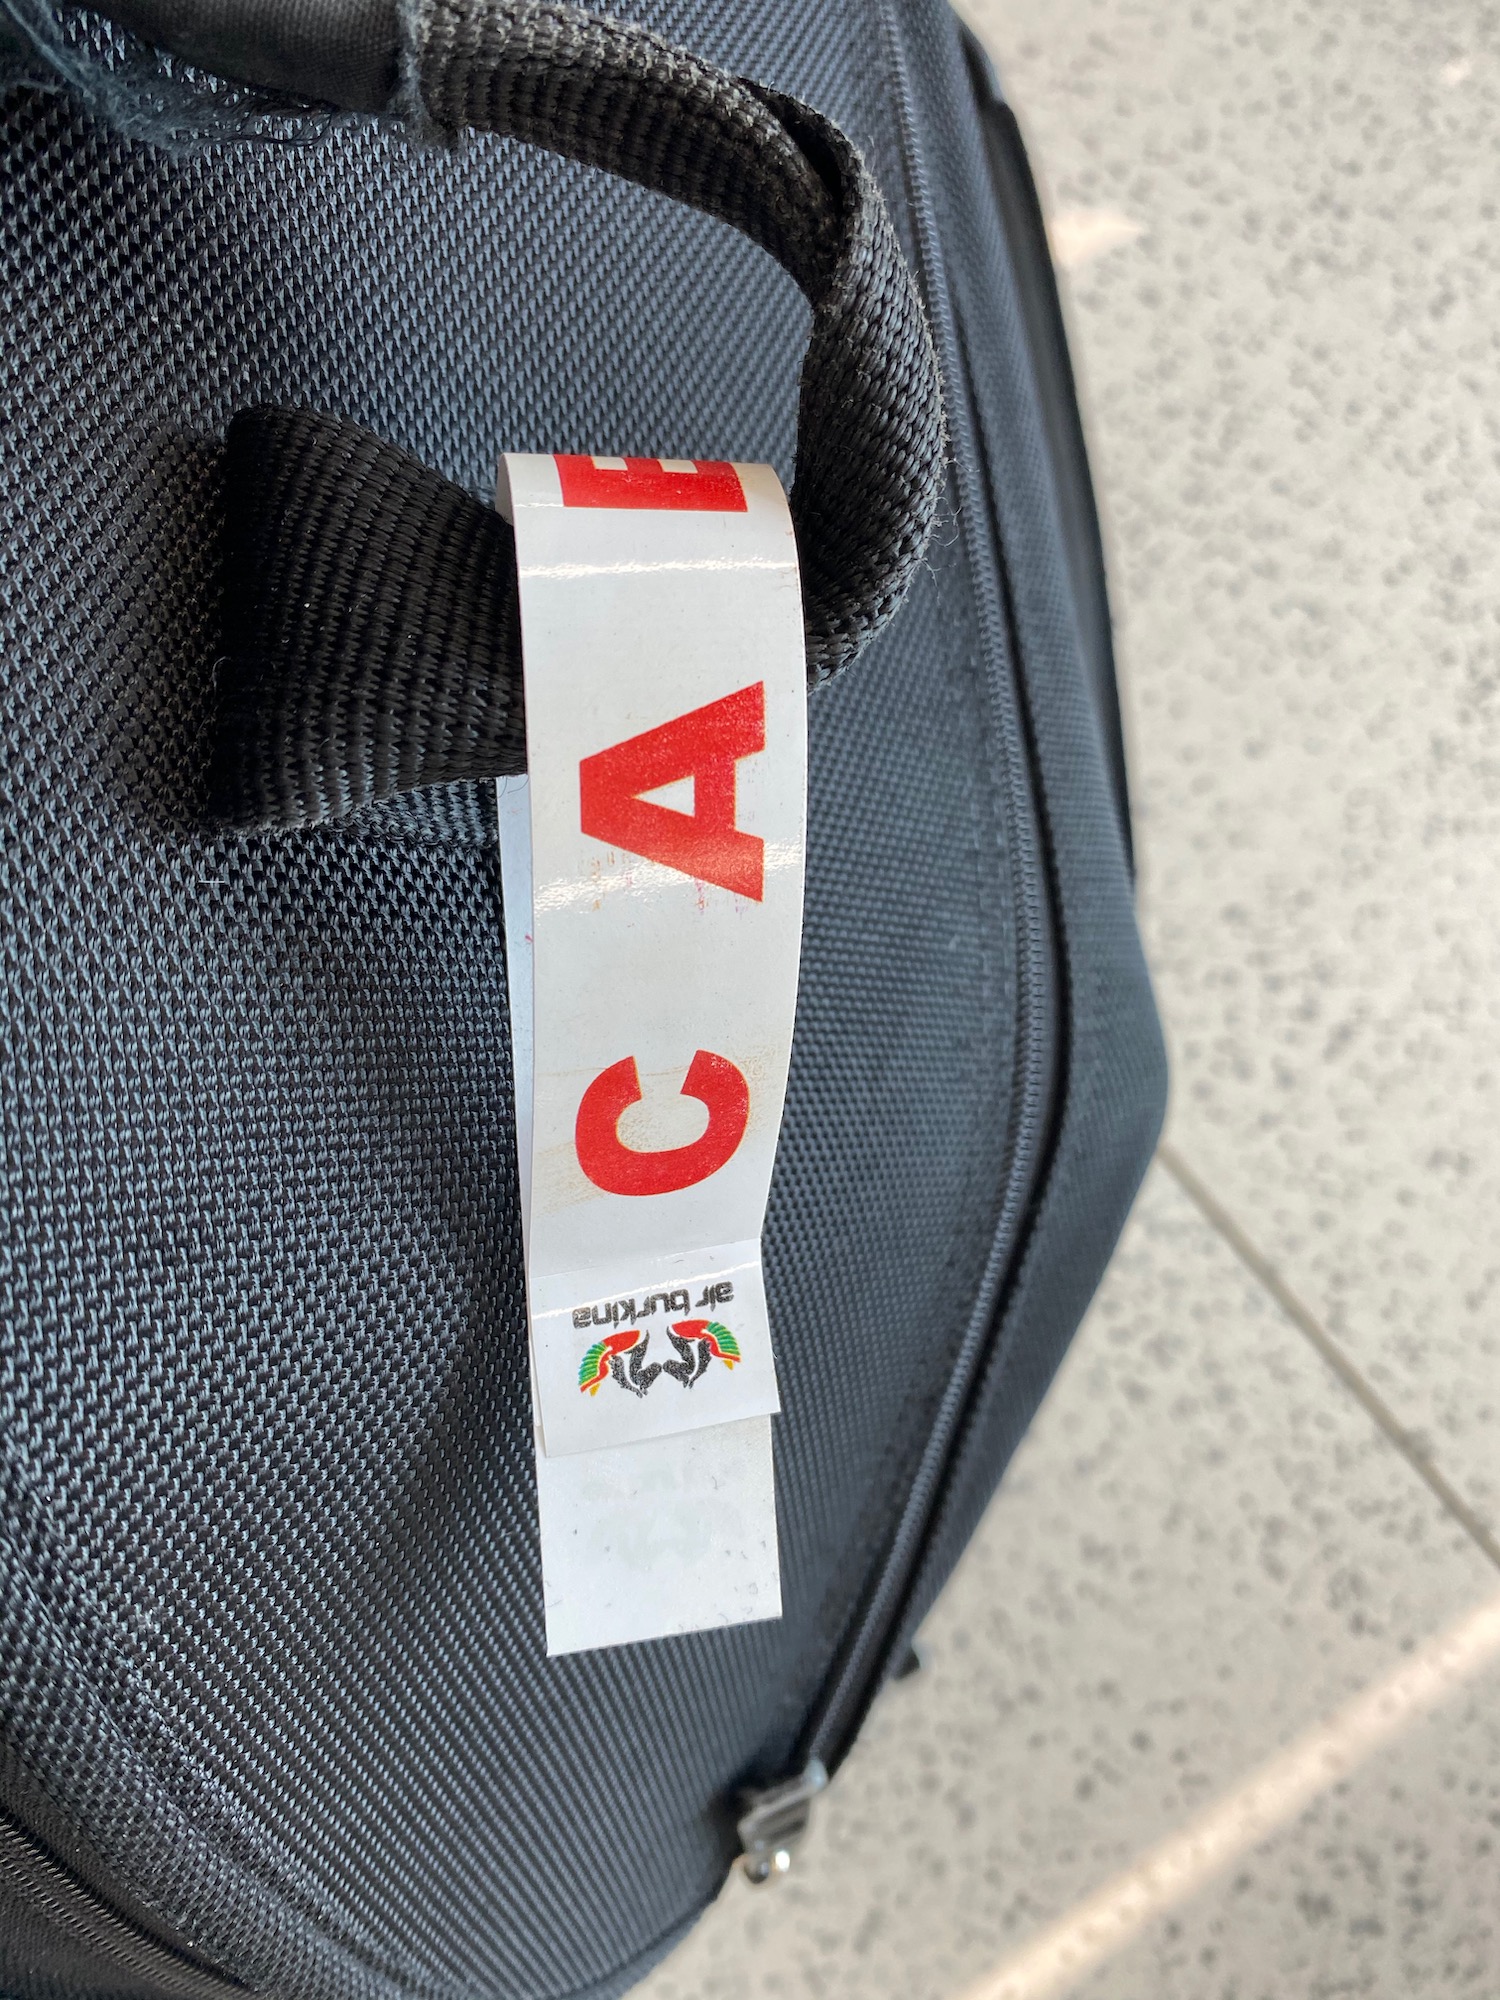 a close up of a luggage tag